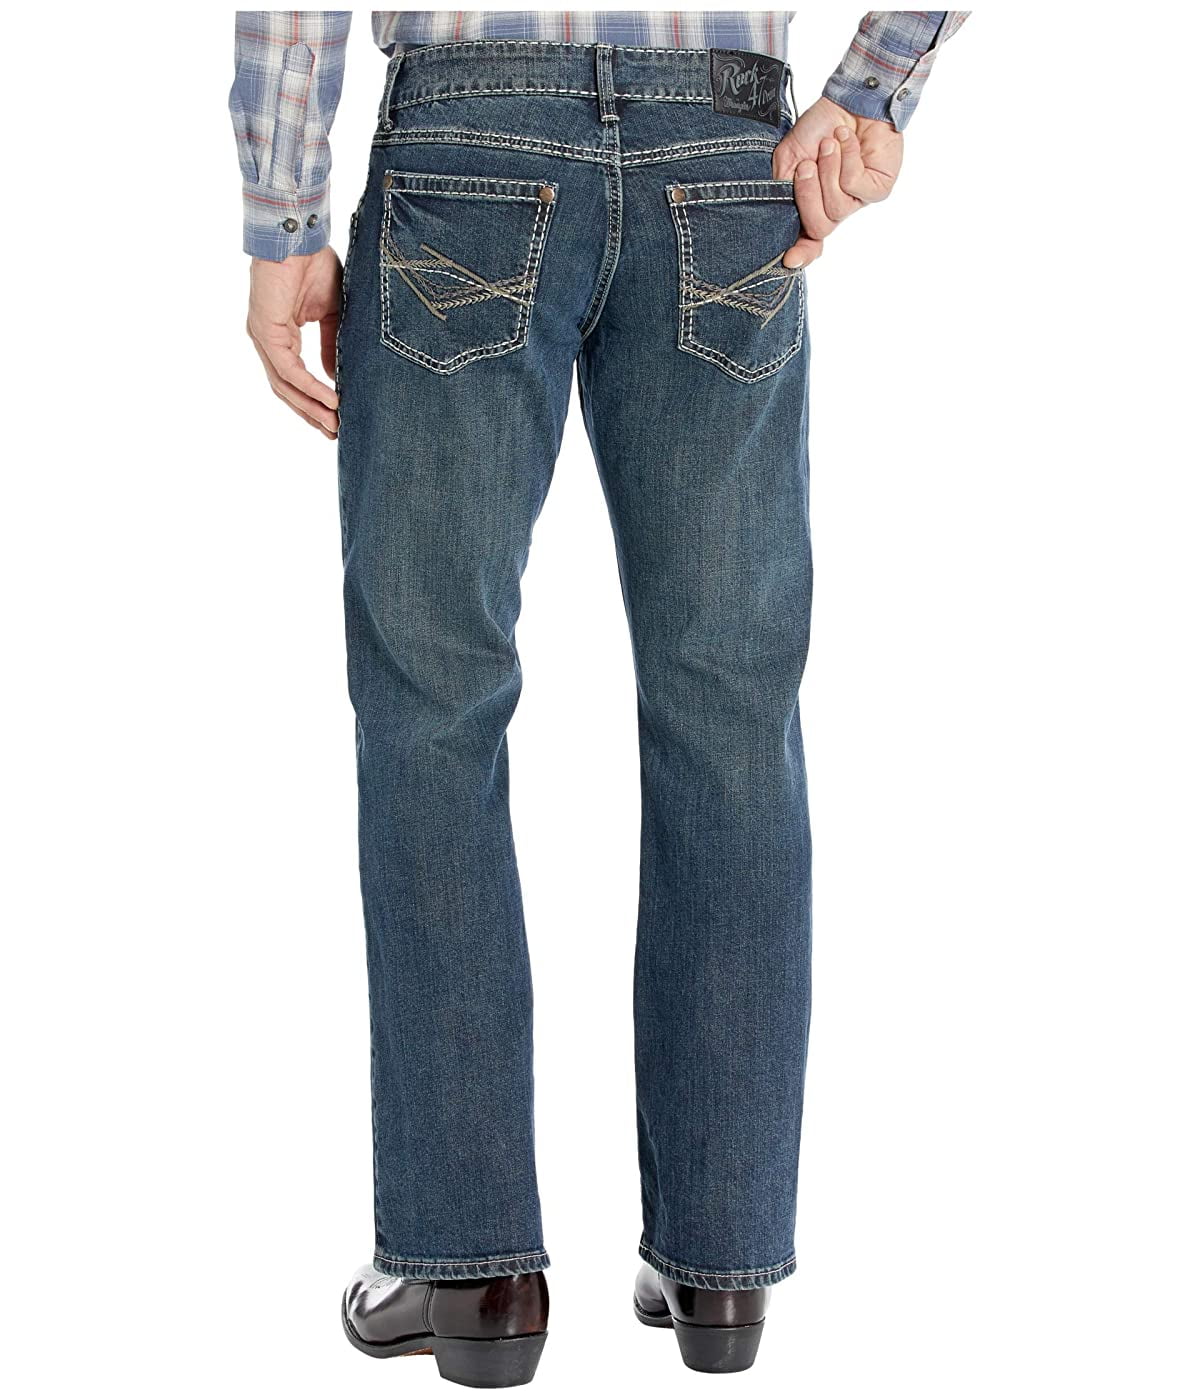 rock 47 jeans clearance